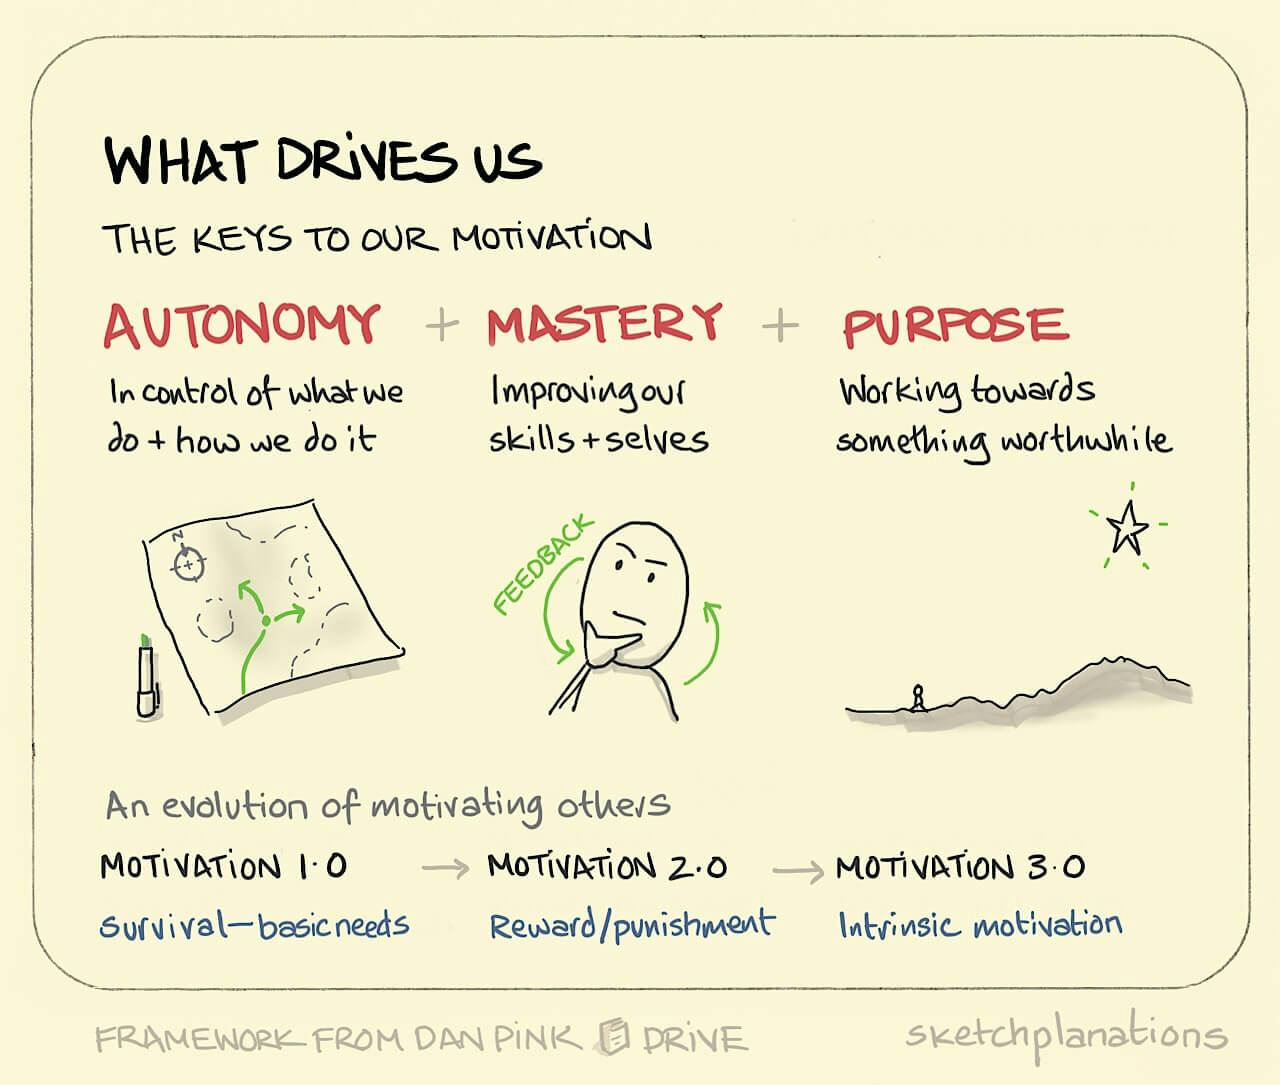 Autonomy Mastery Purpose illustration: Summary of Dan Pink's book What drives us with his framework Autonomy, Mastery, and Purpose